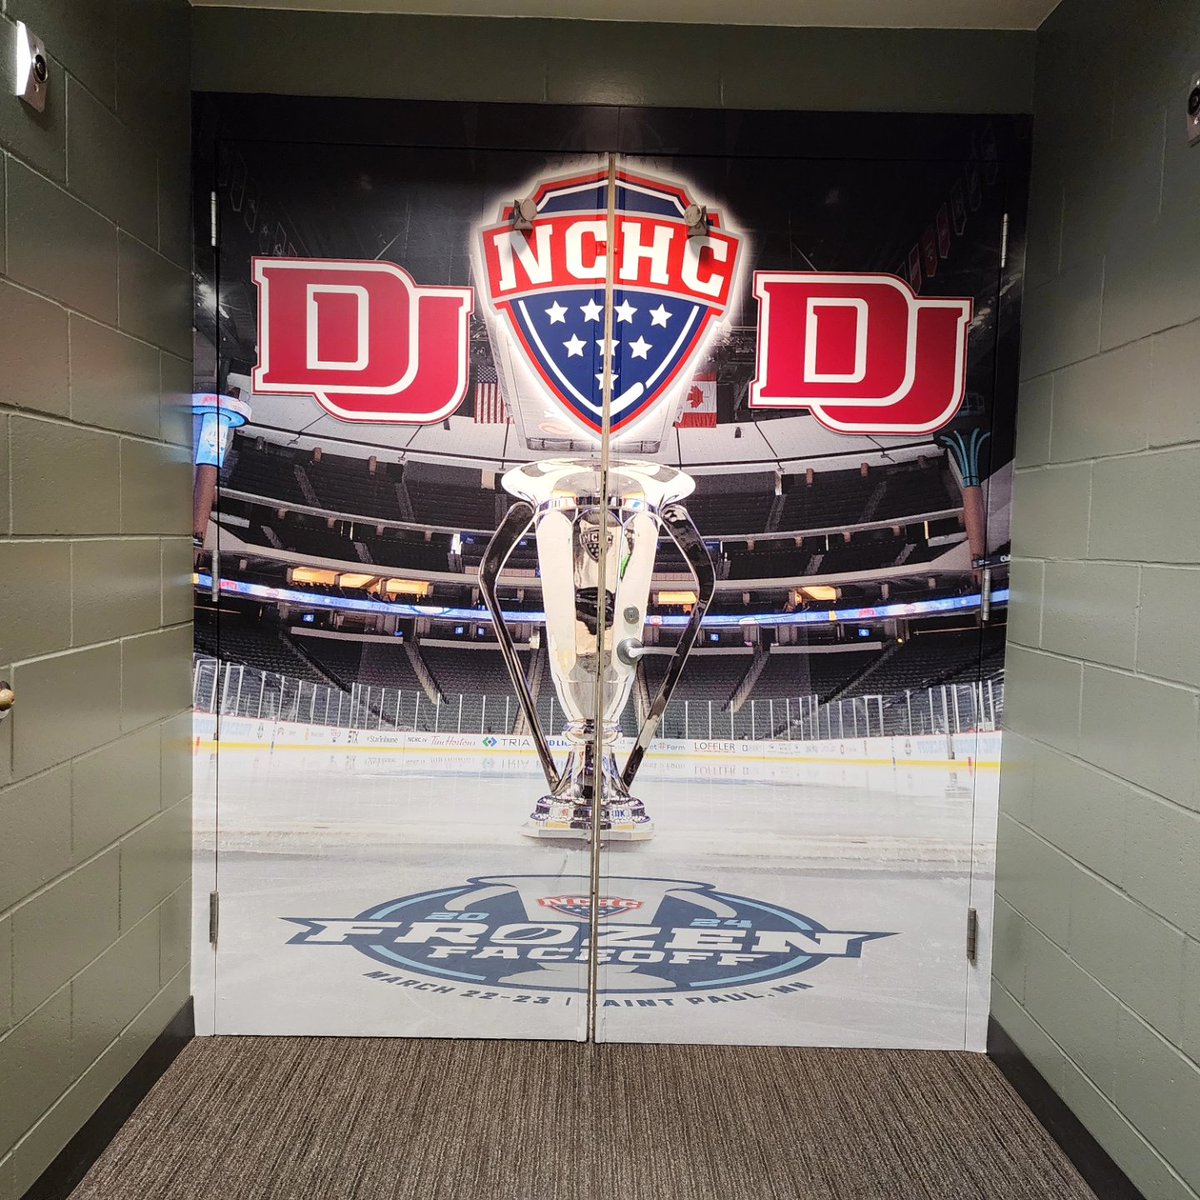 Getting ready for the @thenchc Frozen Faceoff at the @xcelenergyctr

Some sweet new door wraps and mounted items to welcome the teams.  @DU_Hockey @UNDmhockey @SCSUHuskies_MH @OmahaHKY

More branding to come!

#designcreateinstall #nchc #nchchockey #frozenfaceoff